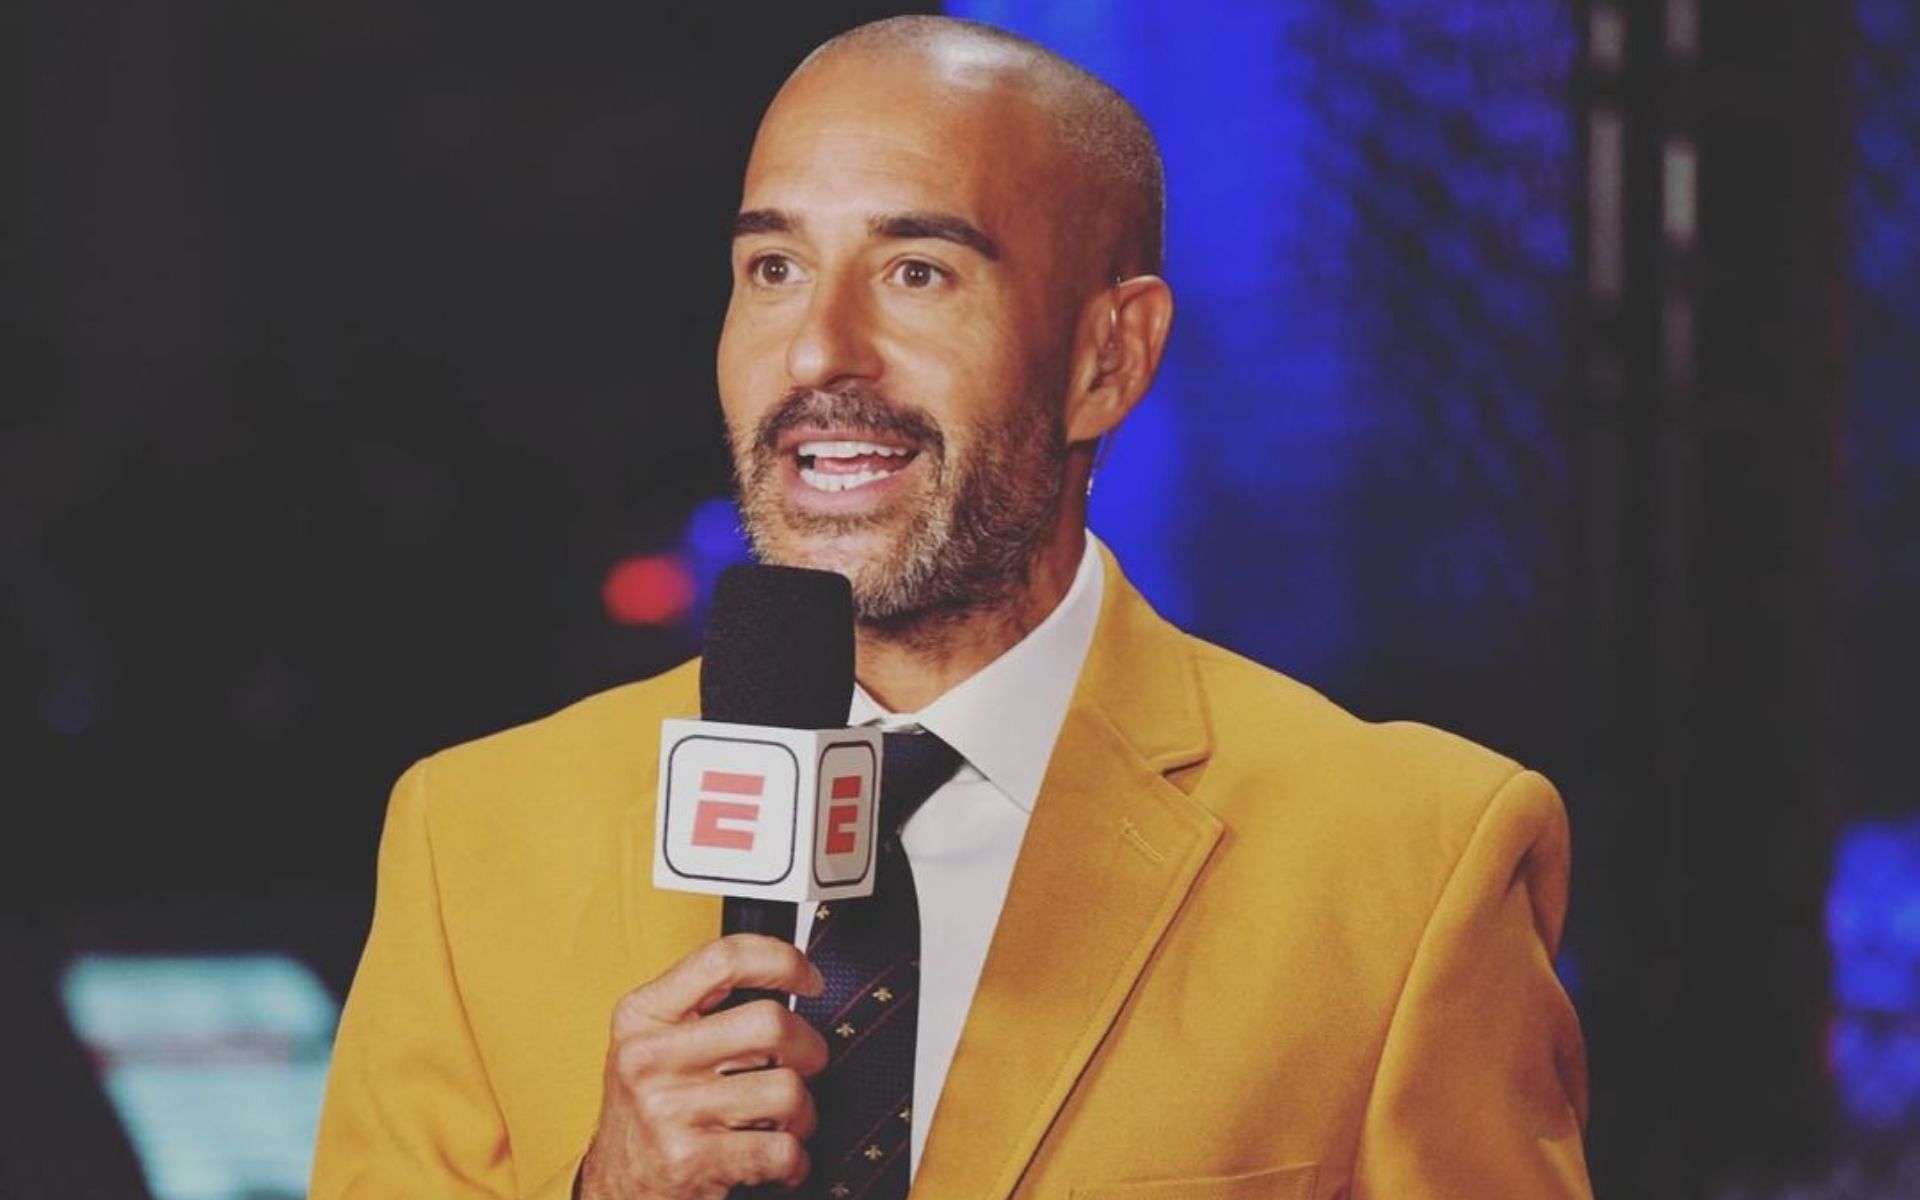 Jon Anik thinks on the consequences of his statements made to the UFC community